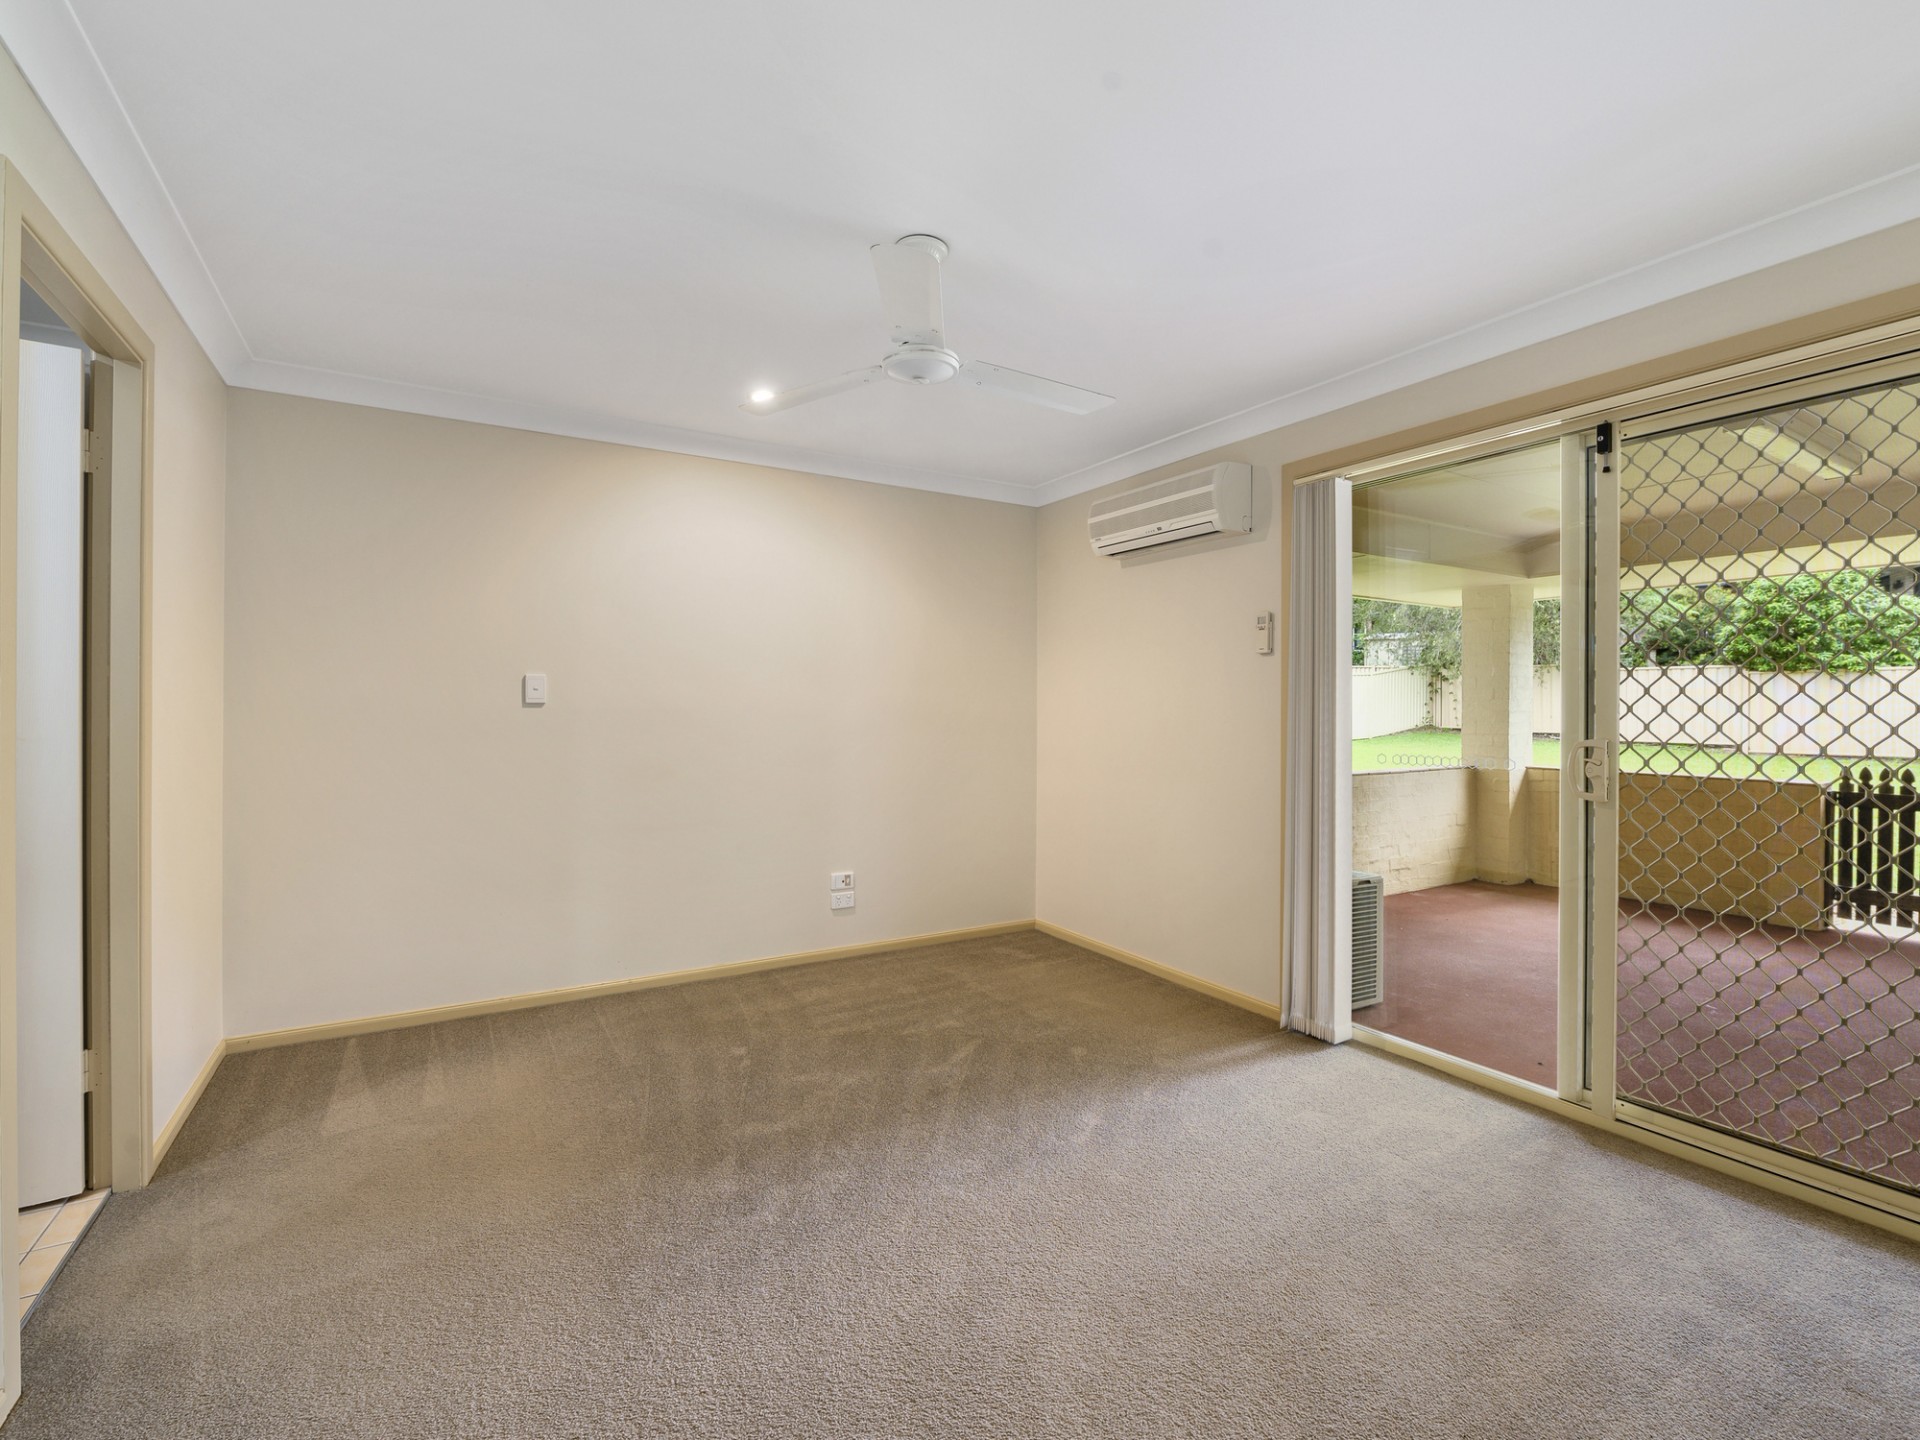 Real Estate in Sawtell